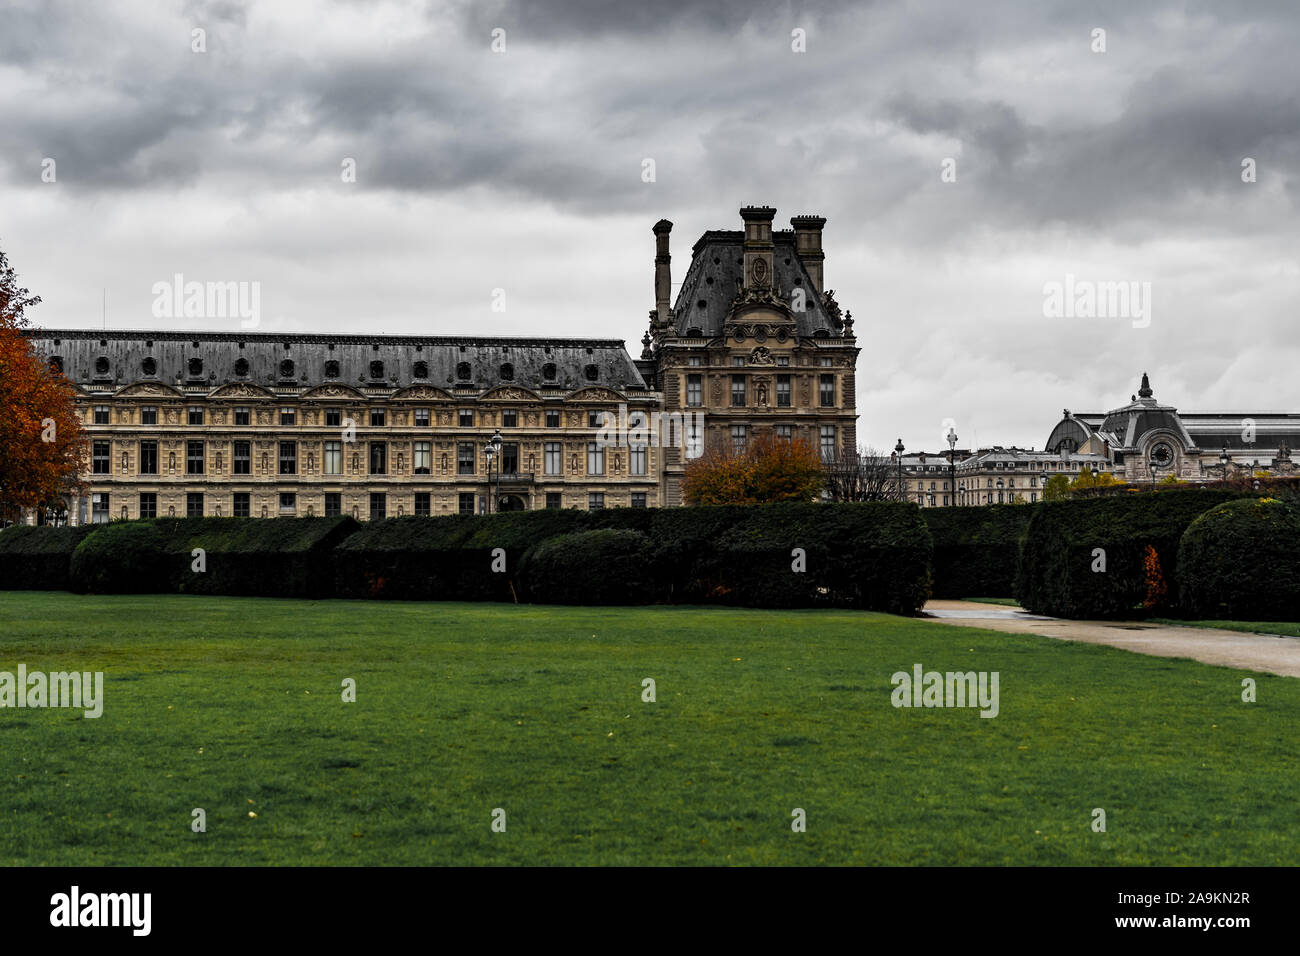 Parisian architecture, famous buildings and way of life Stock Photo